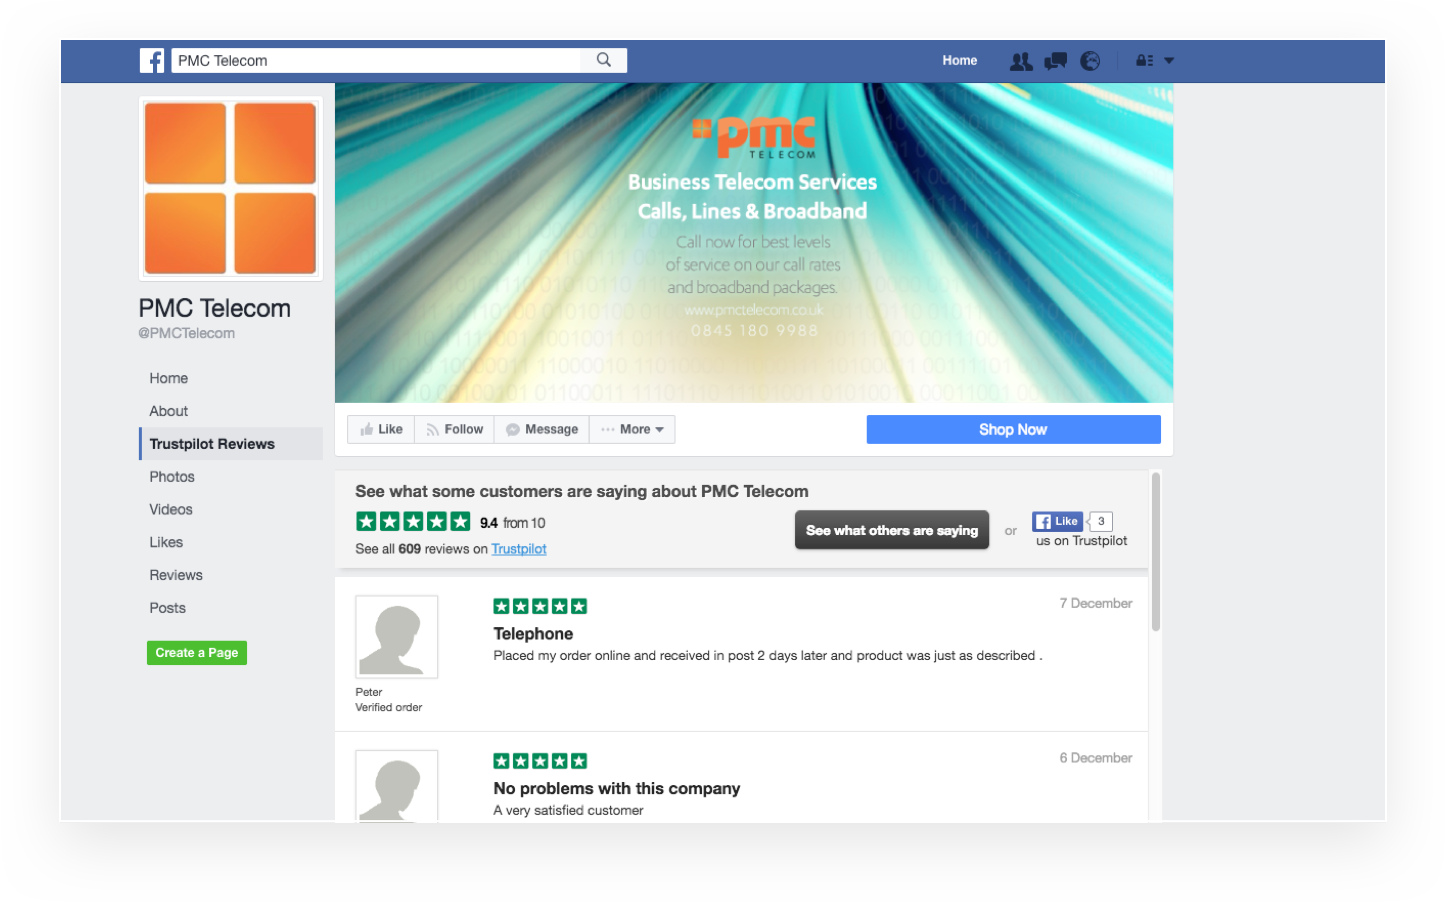 Trustpilot Software - Share reviews further with one-click sharing on Facebook, Twitter, and Google+ timelines